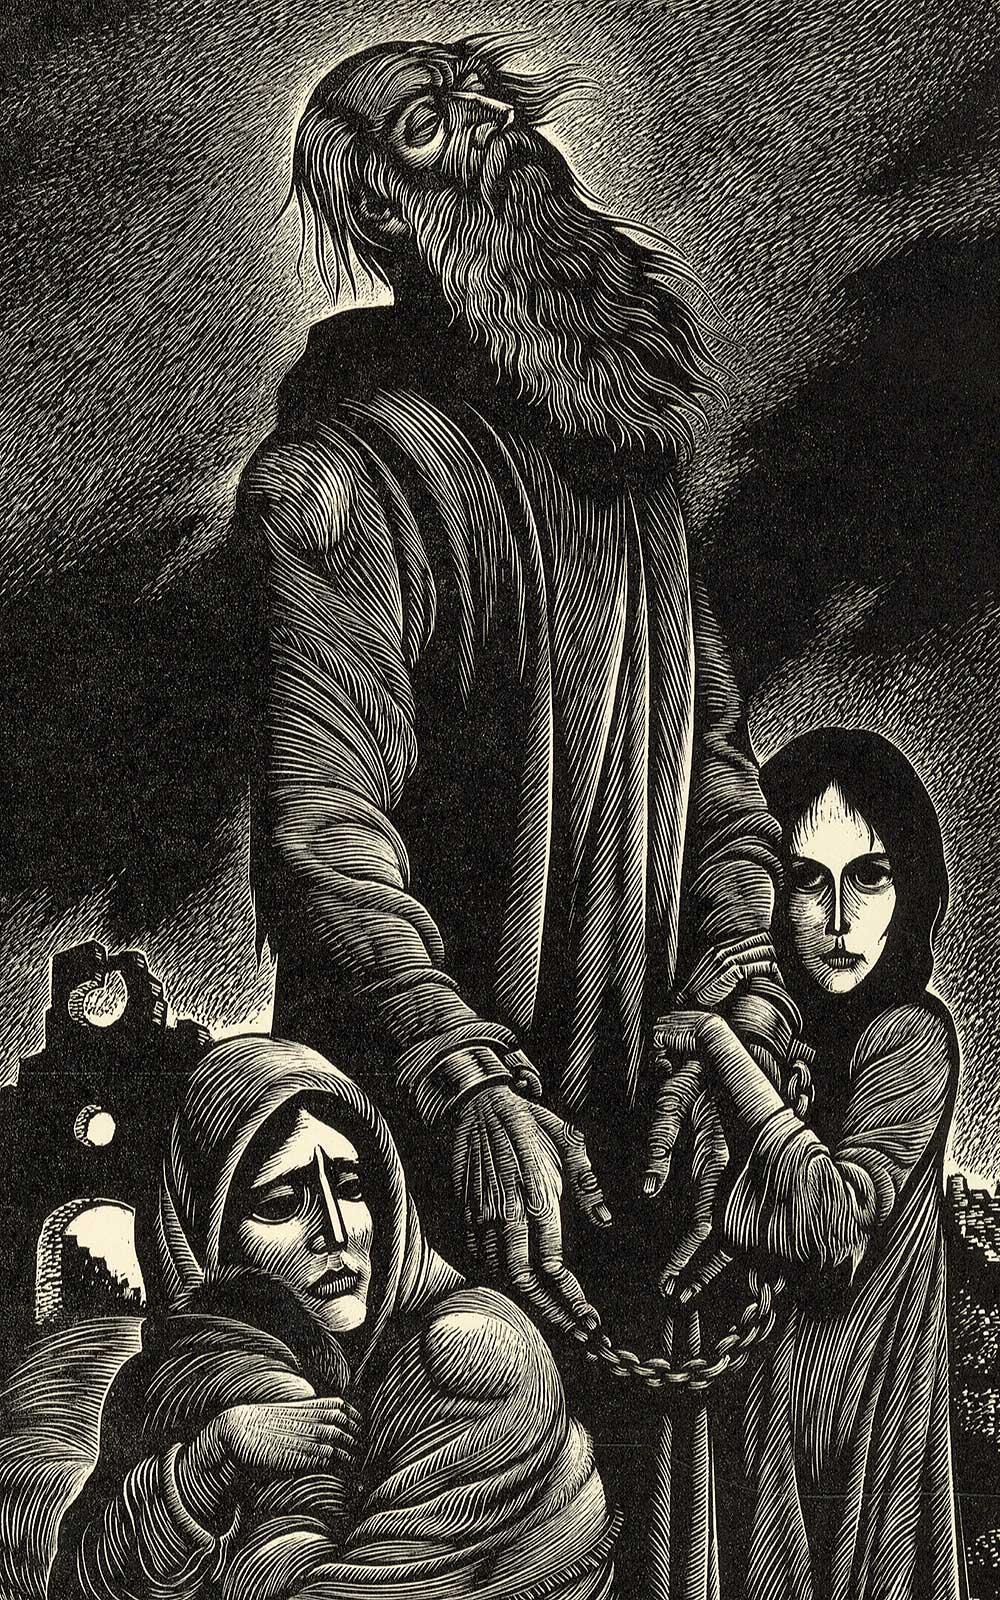 The Lamentation of Jeremiah (biblical prophet of judgment and hope) - Print by Fritz Eichenberg.